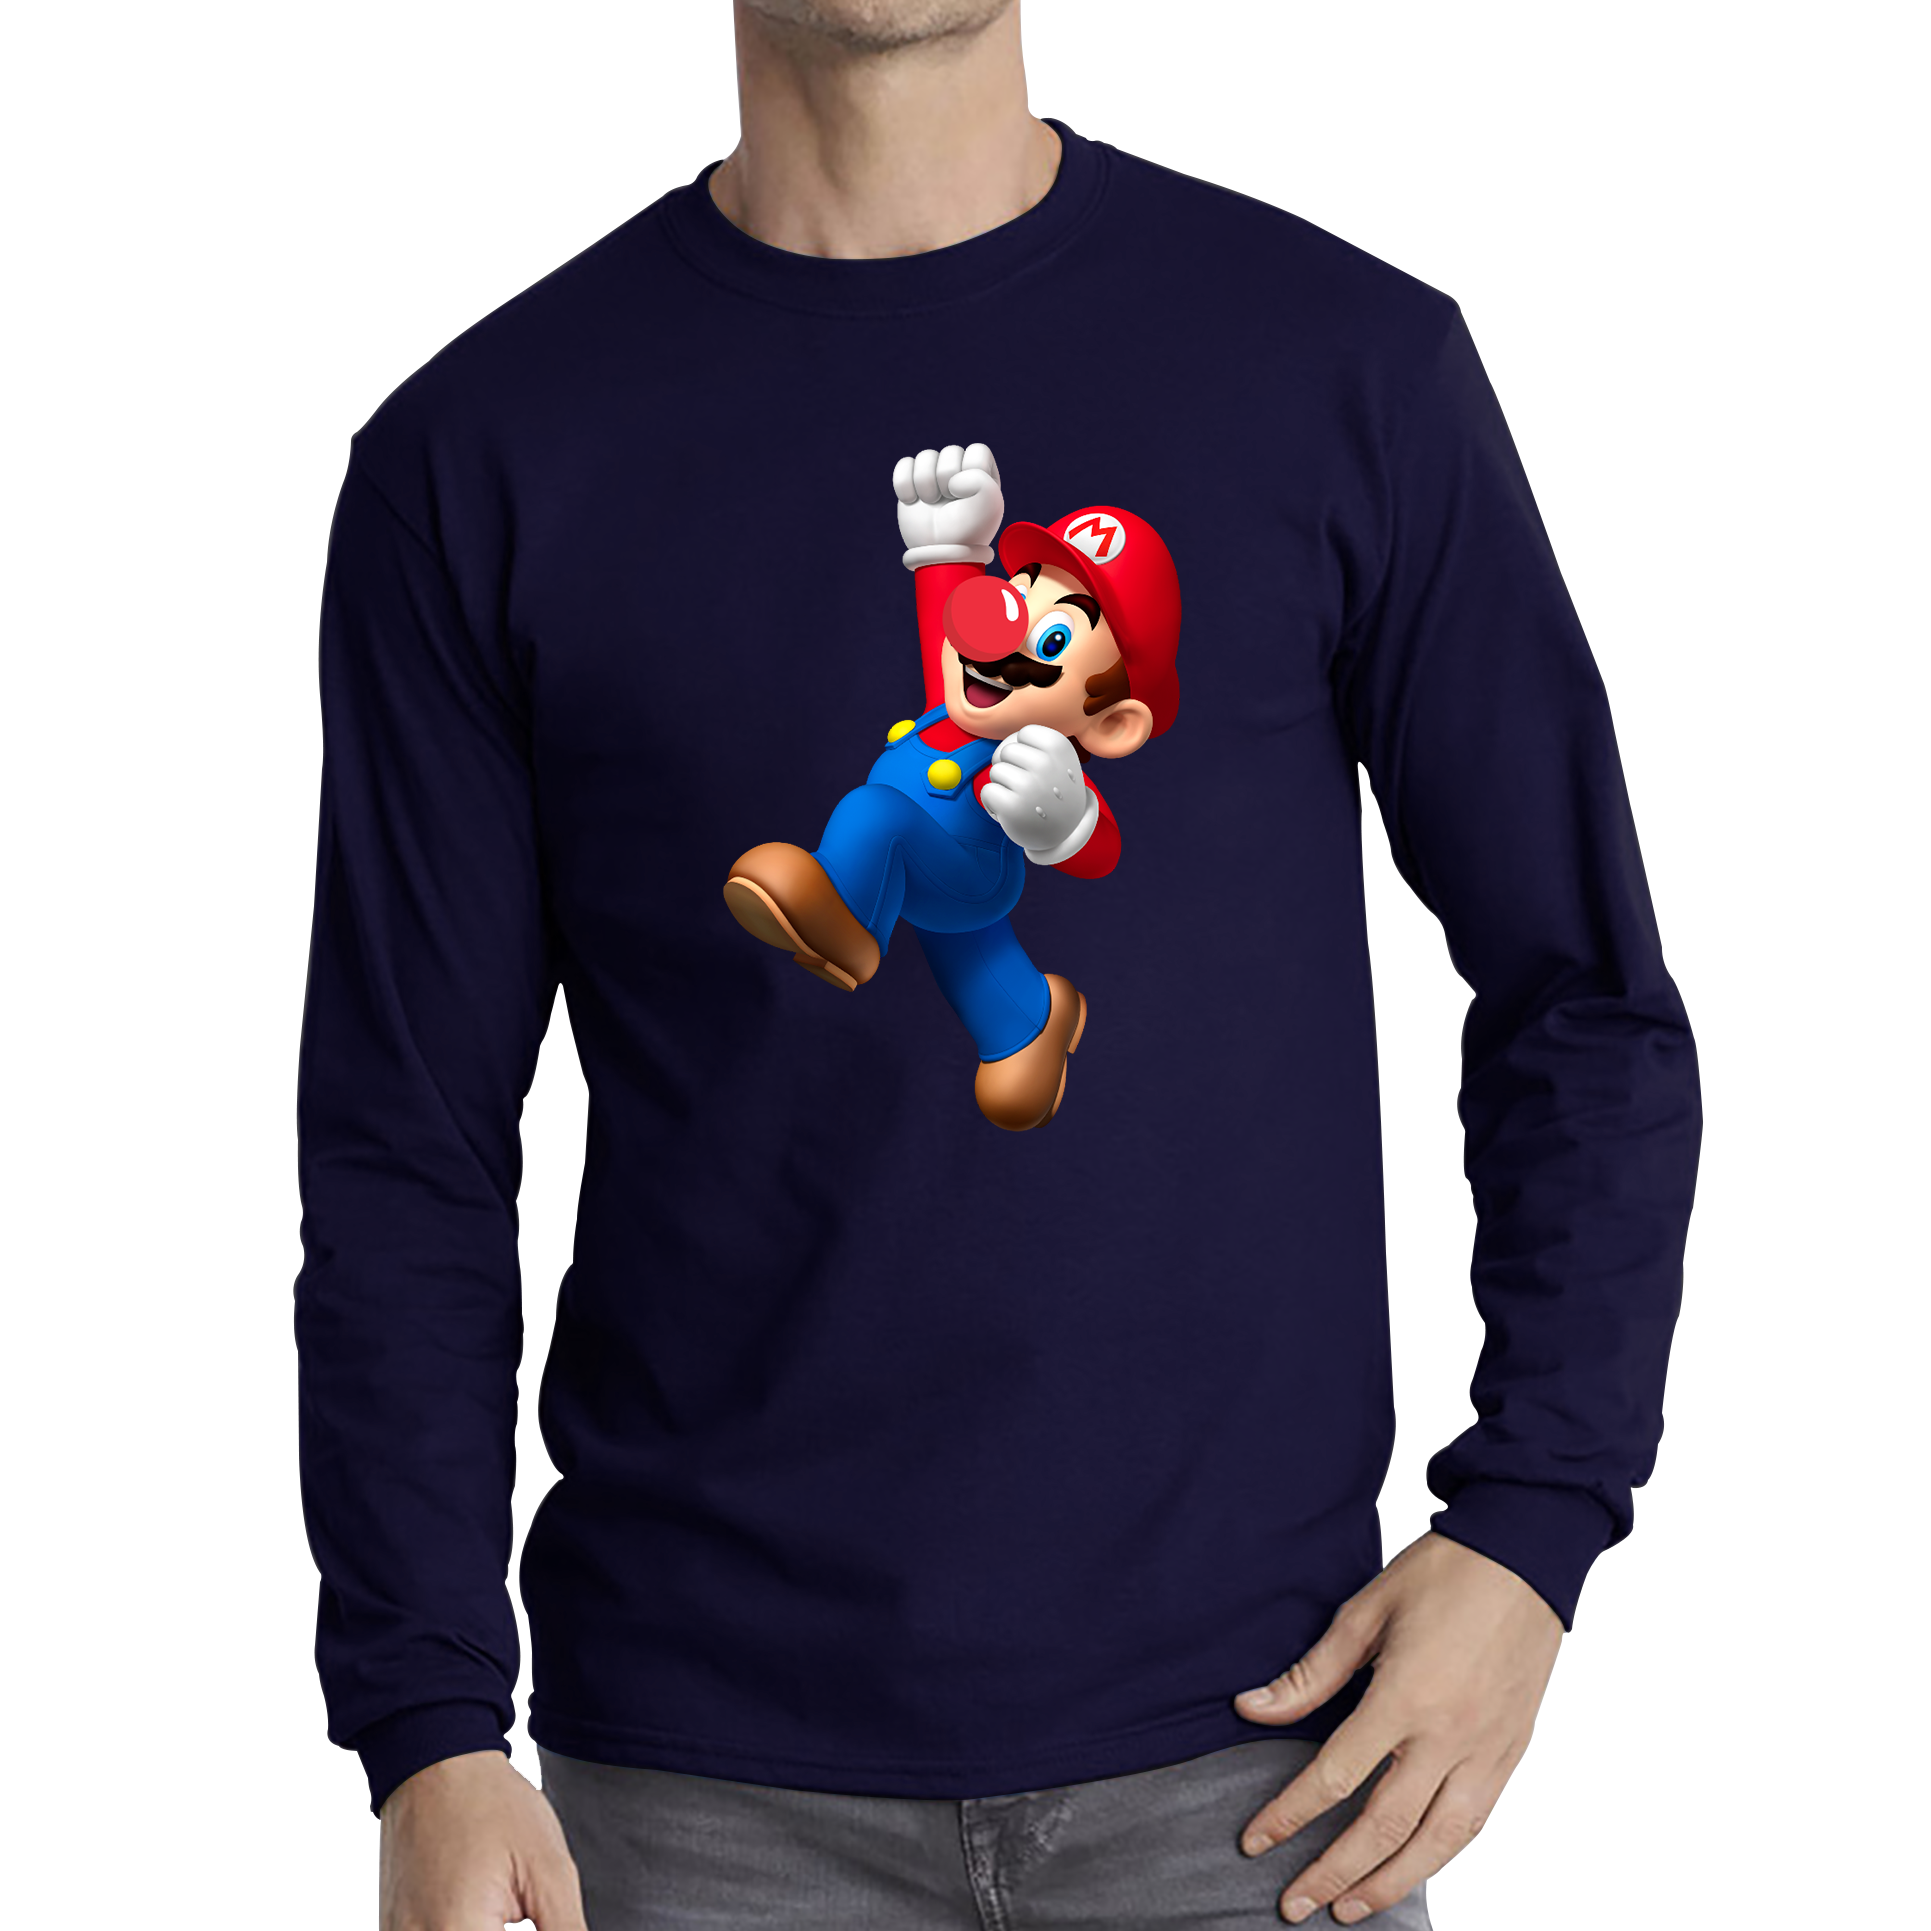 Super Mario Bros Red Nose Day Adult Long Sleeve T Shirt. 50% Goes To Charity